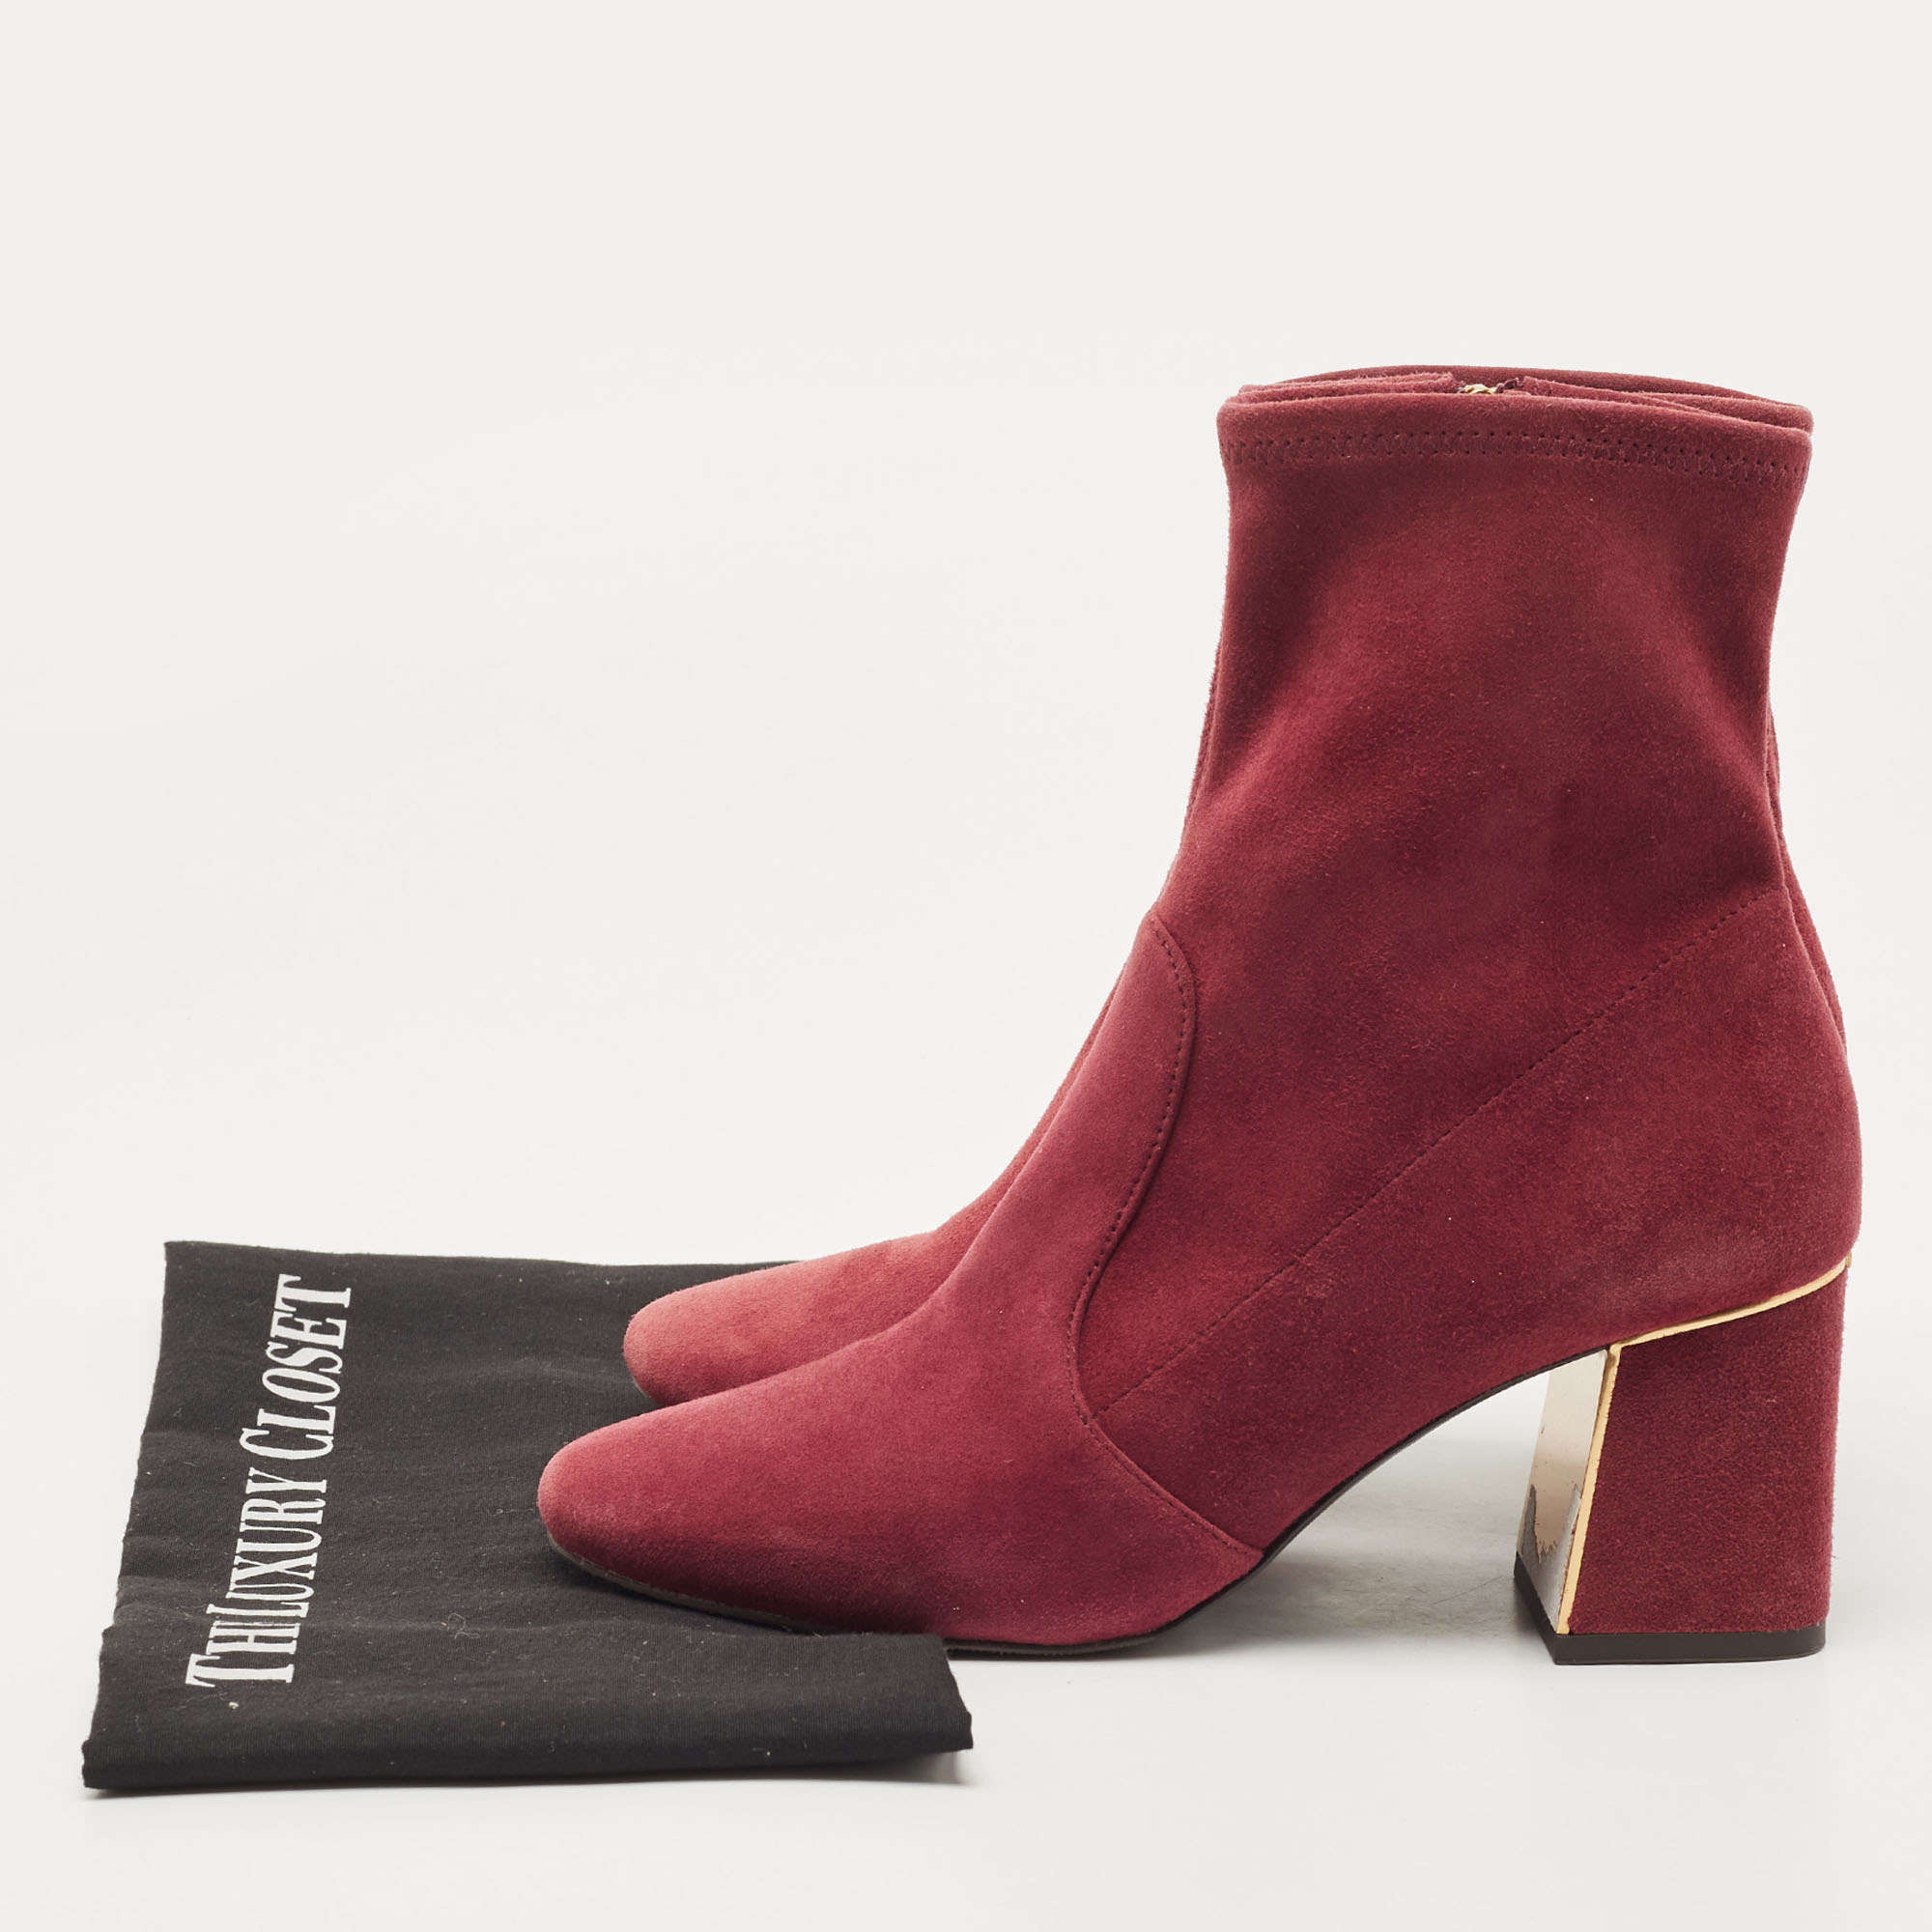 Tory Burch Burgundy Suede Ankle Boots Size 37